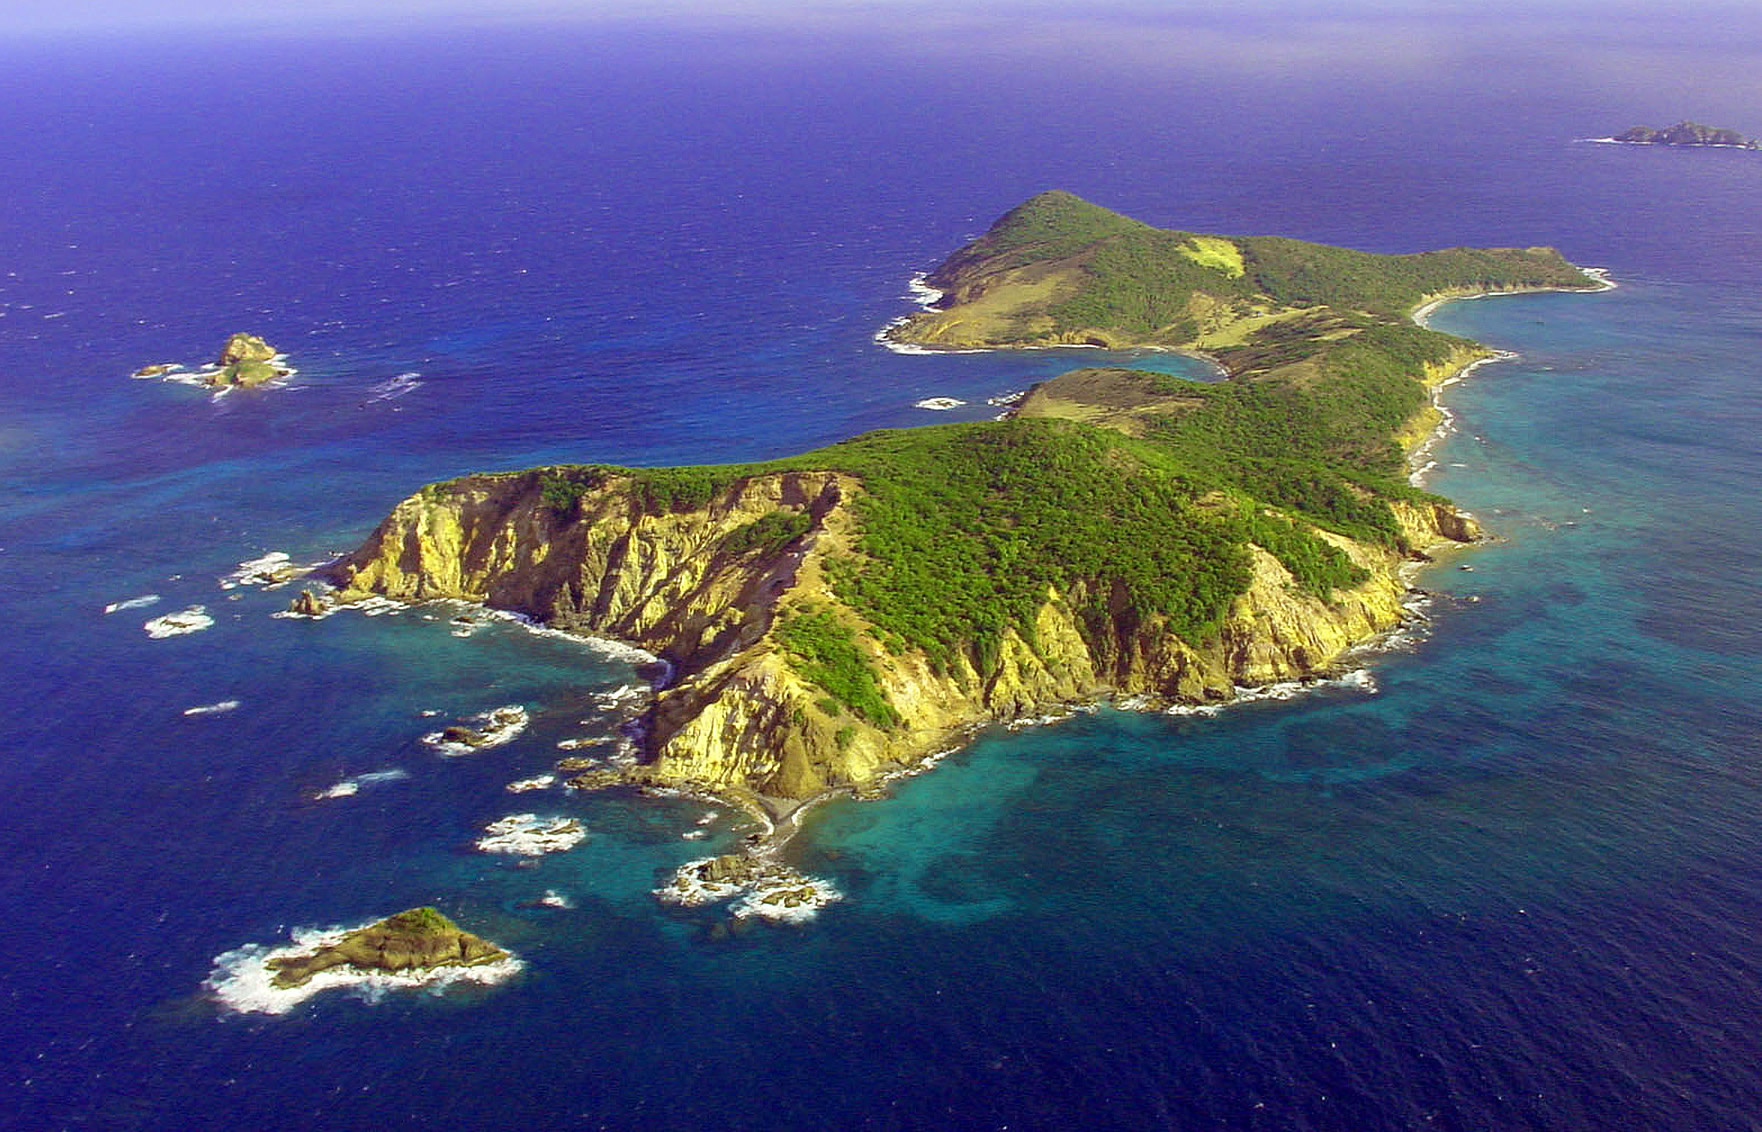 Balliceaux Island - SVG, Caribbean - Private Islands for Sale